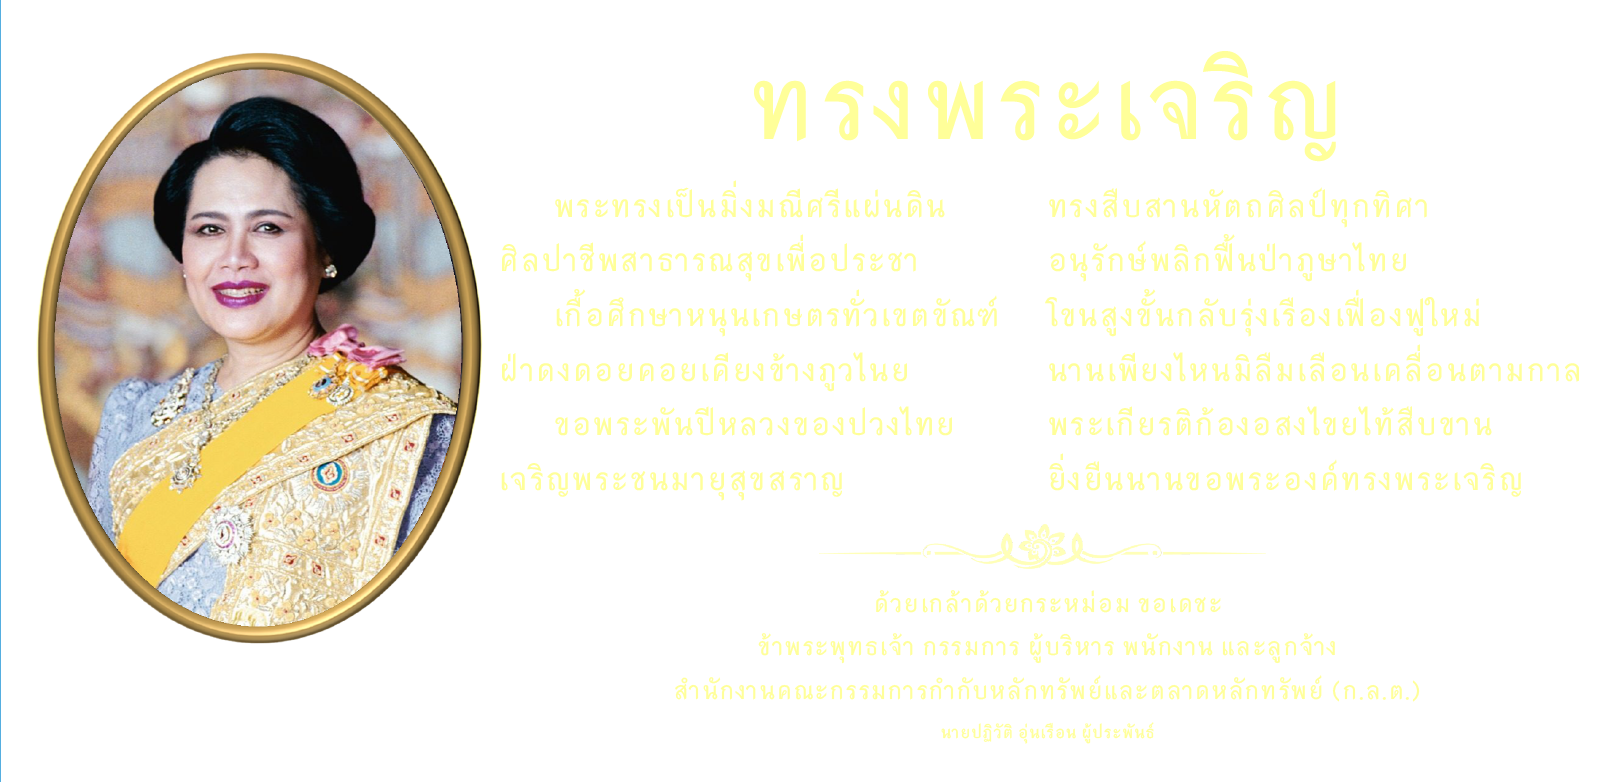 Long Live Her Majesty Queen Sirikit The Queen Mother